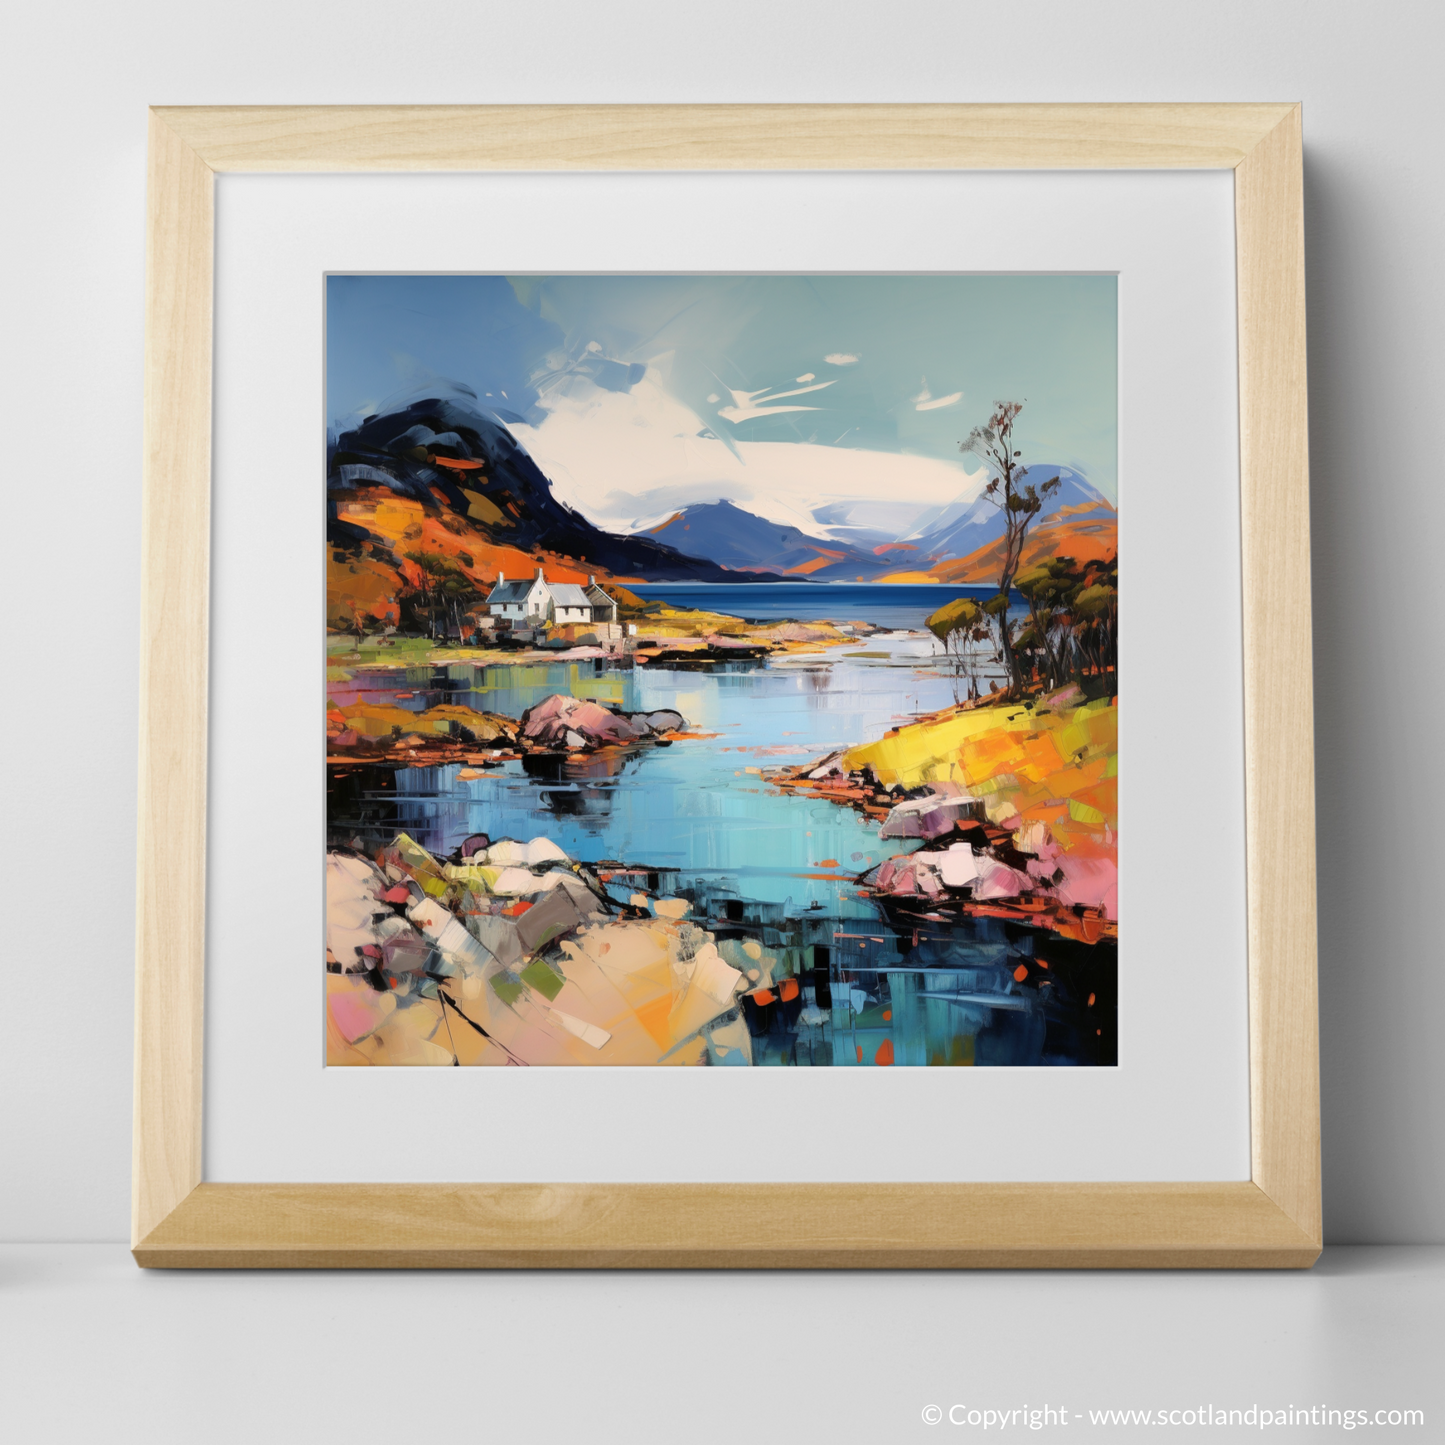 Art Print of Shieldaig Bay, Wester Ross with a natural frame